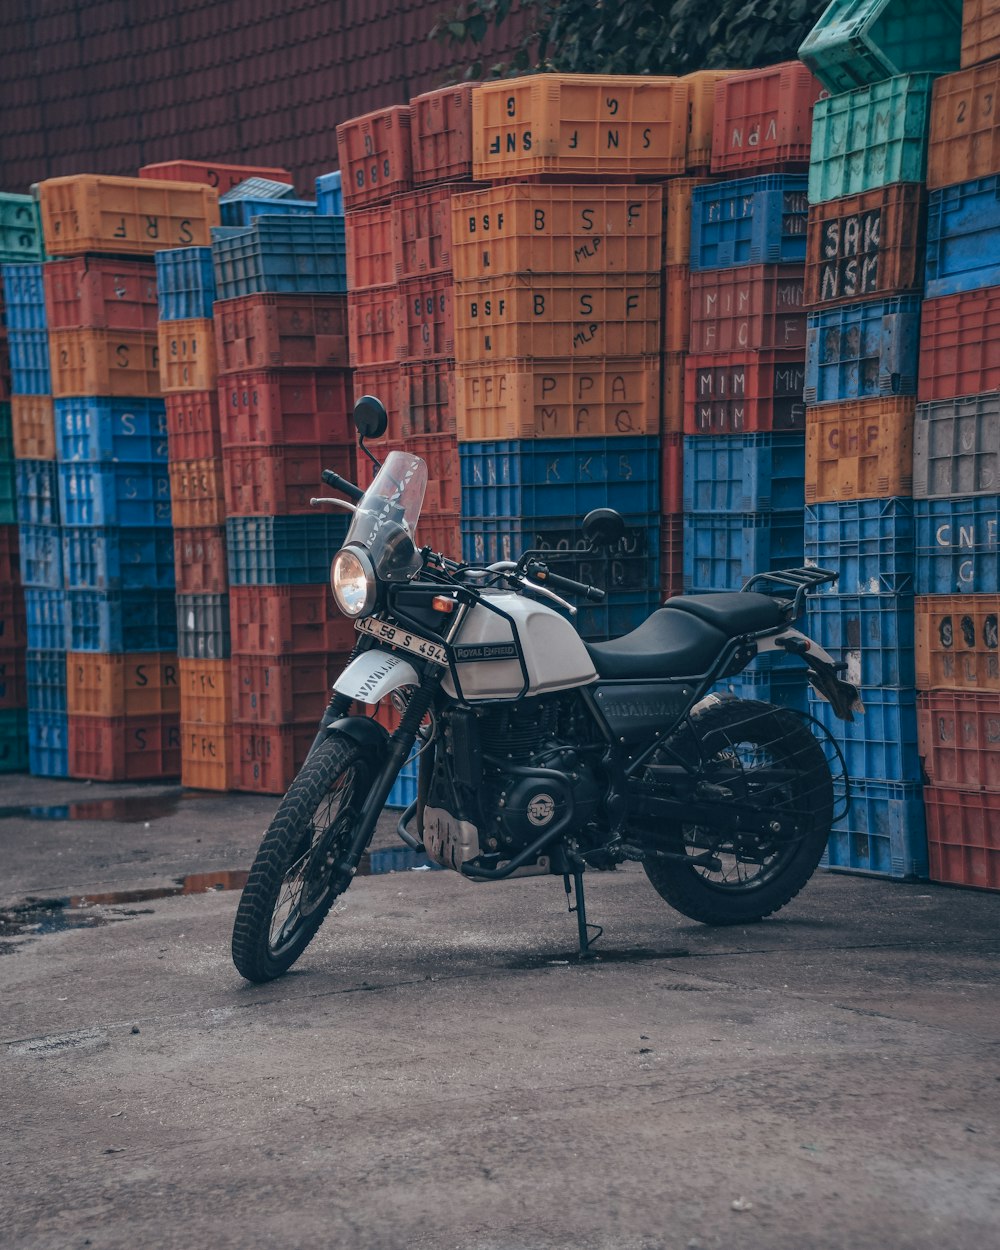 a black and white motorcycle parked in front of stacks of crates